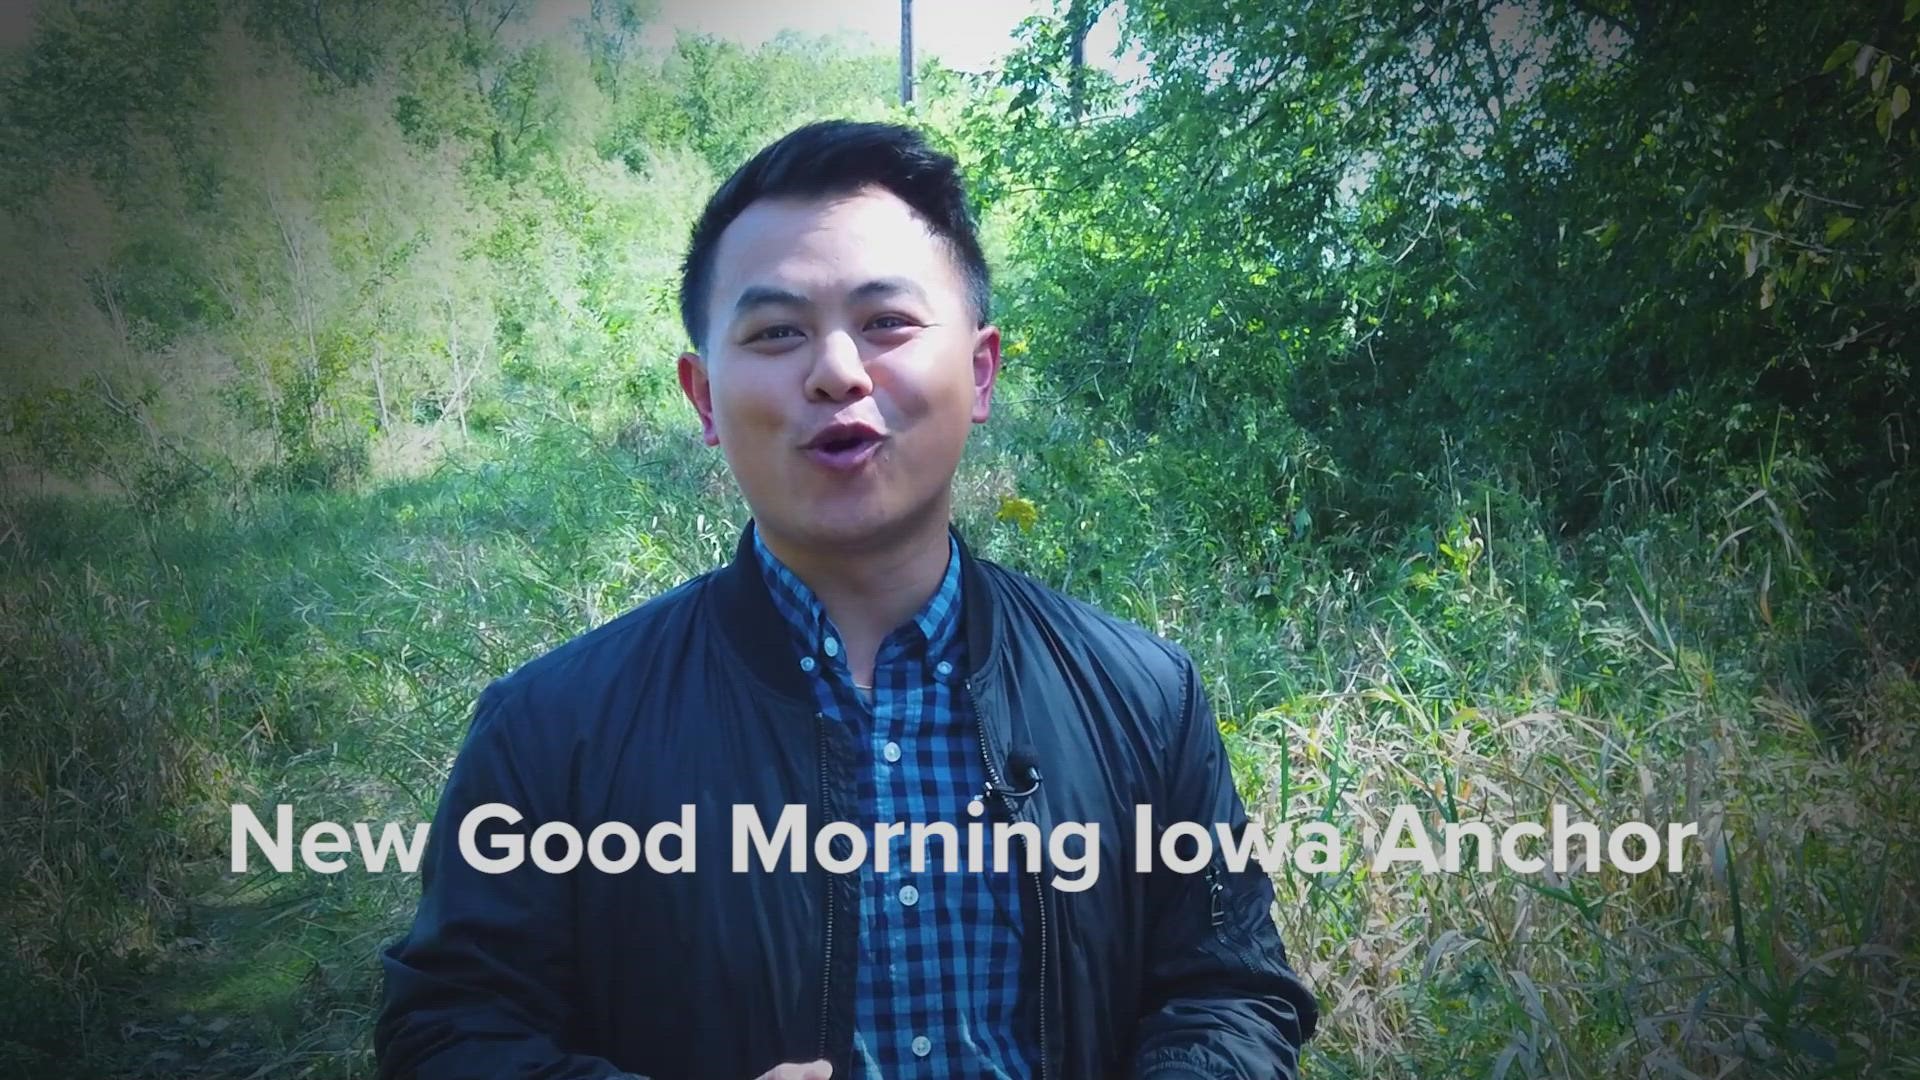 From spicy food to superhero movies, here's five things to know about "Good Morning Iowa" anchor and reporter Chenue Her.